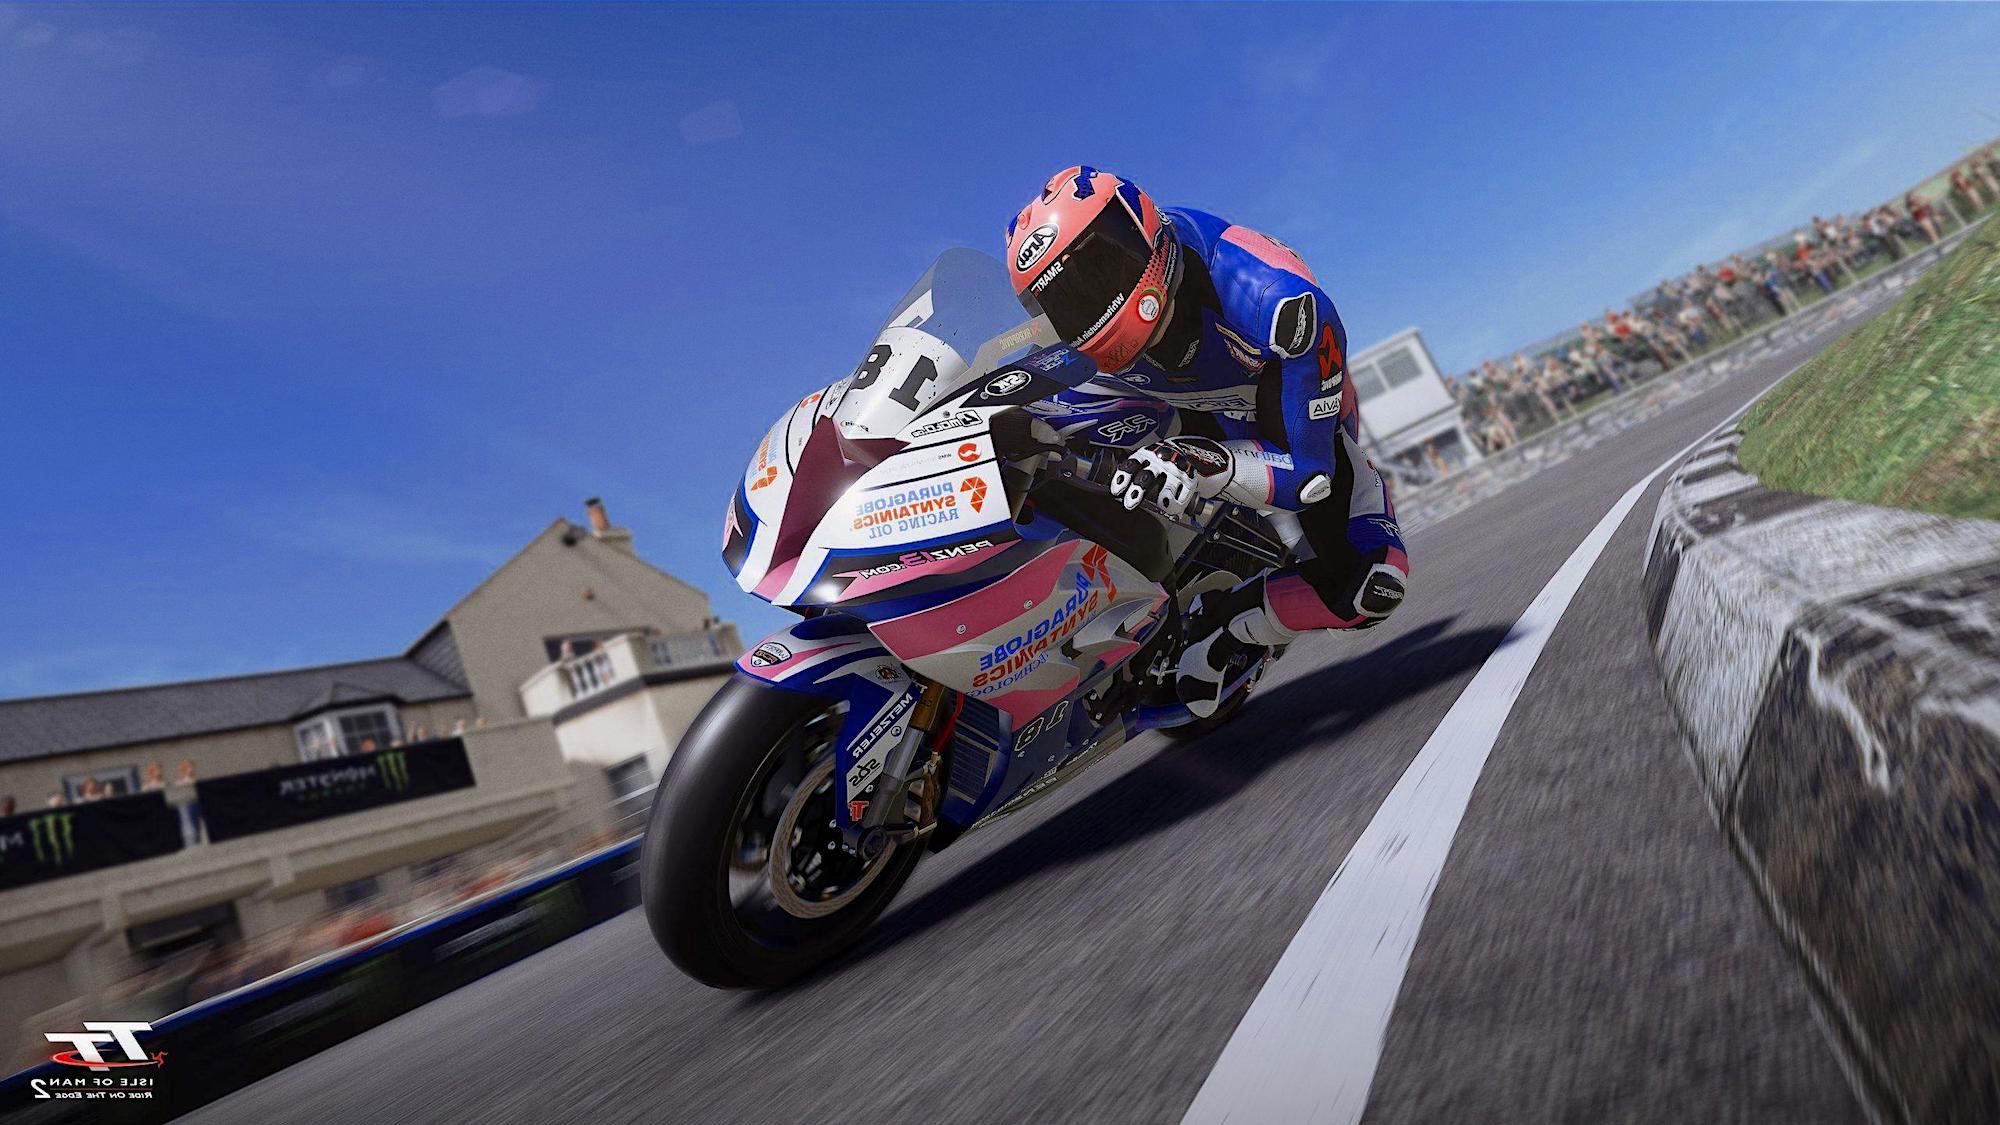 Advertisement for the new game from NACON: "Isle of Man TT - Ride on the Edge 3." Media sourced from Game News 24.